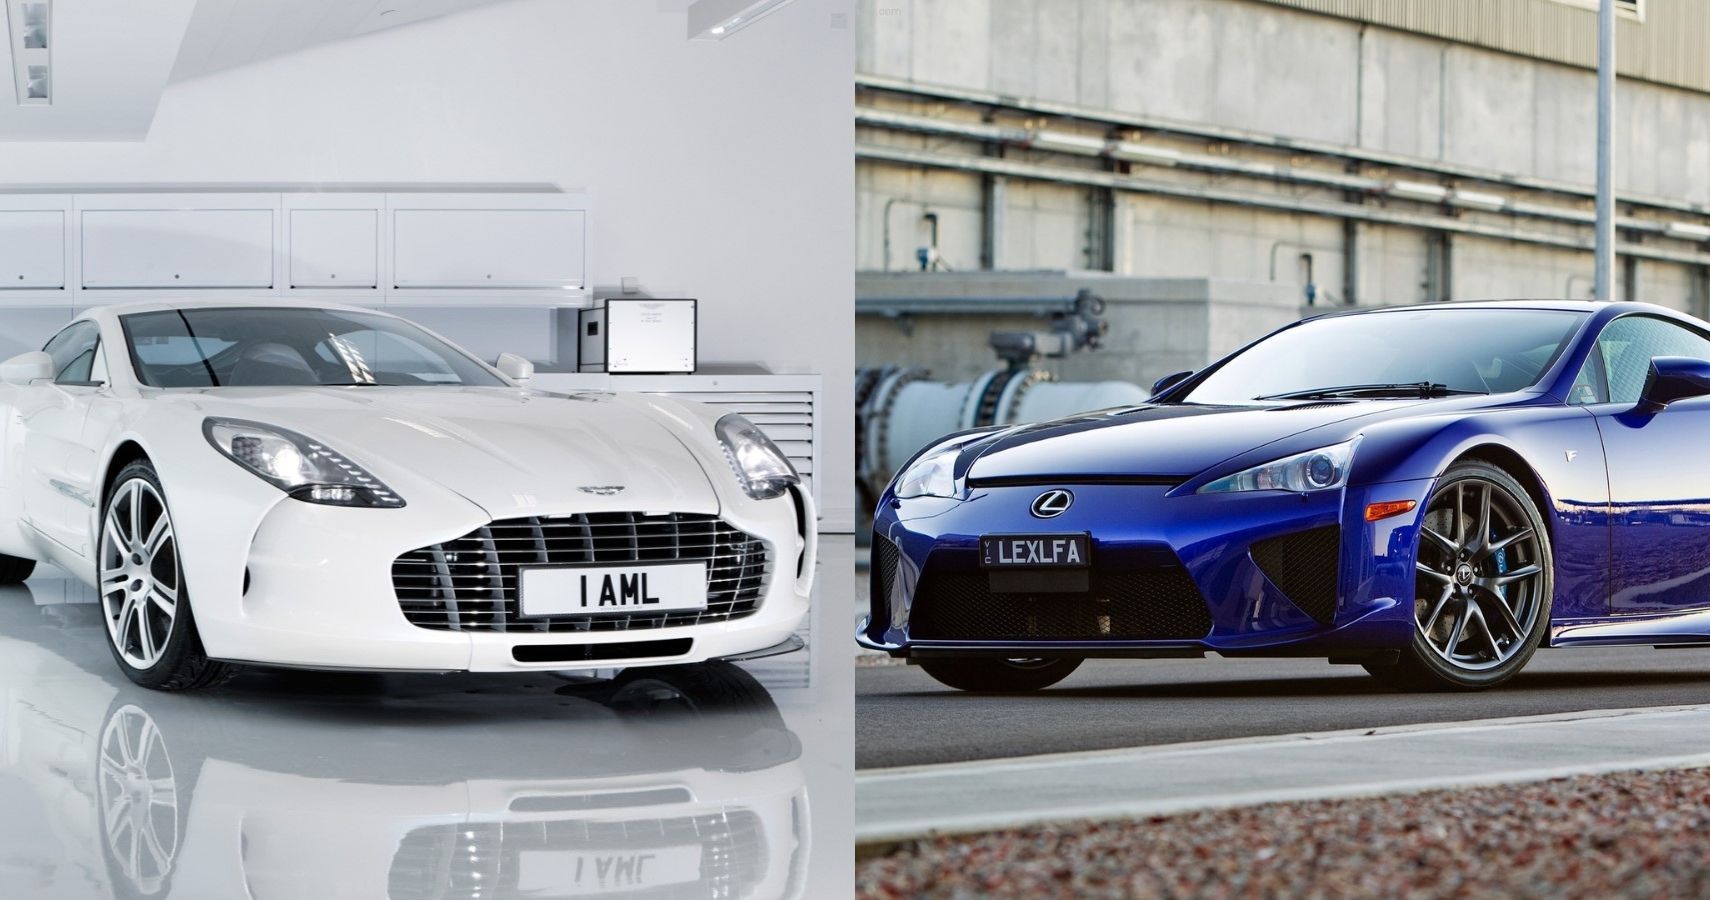 Aston Martin One-77 and Lexus LFA side-by-side comparison